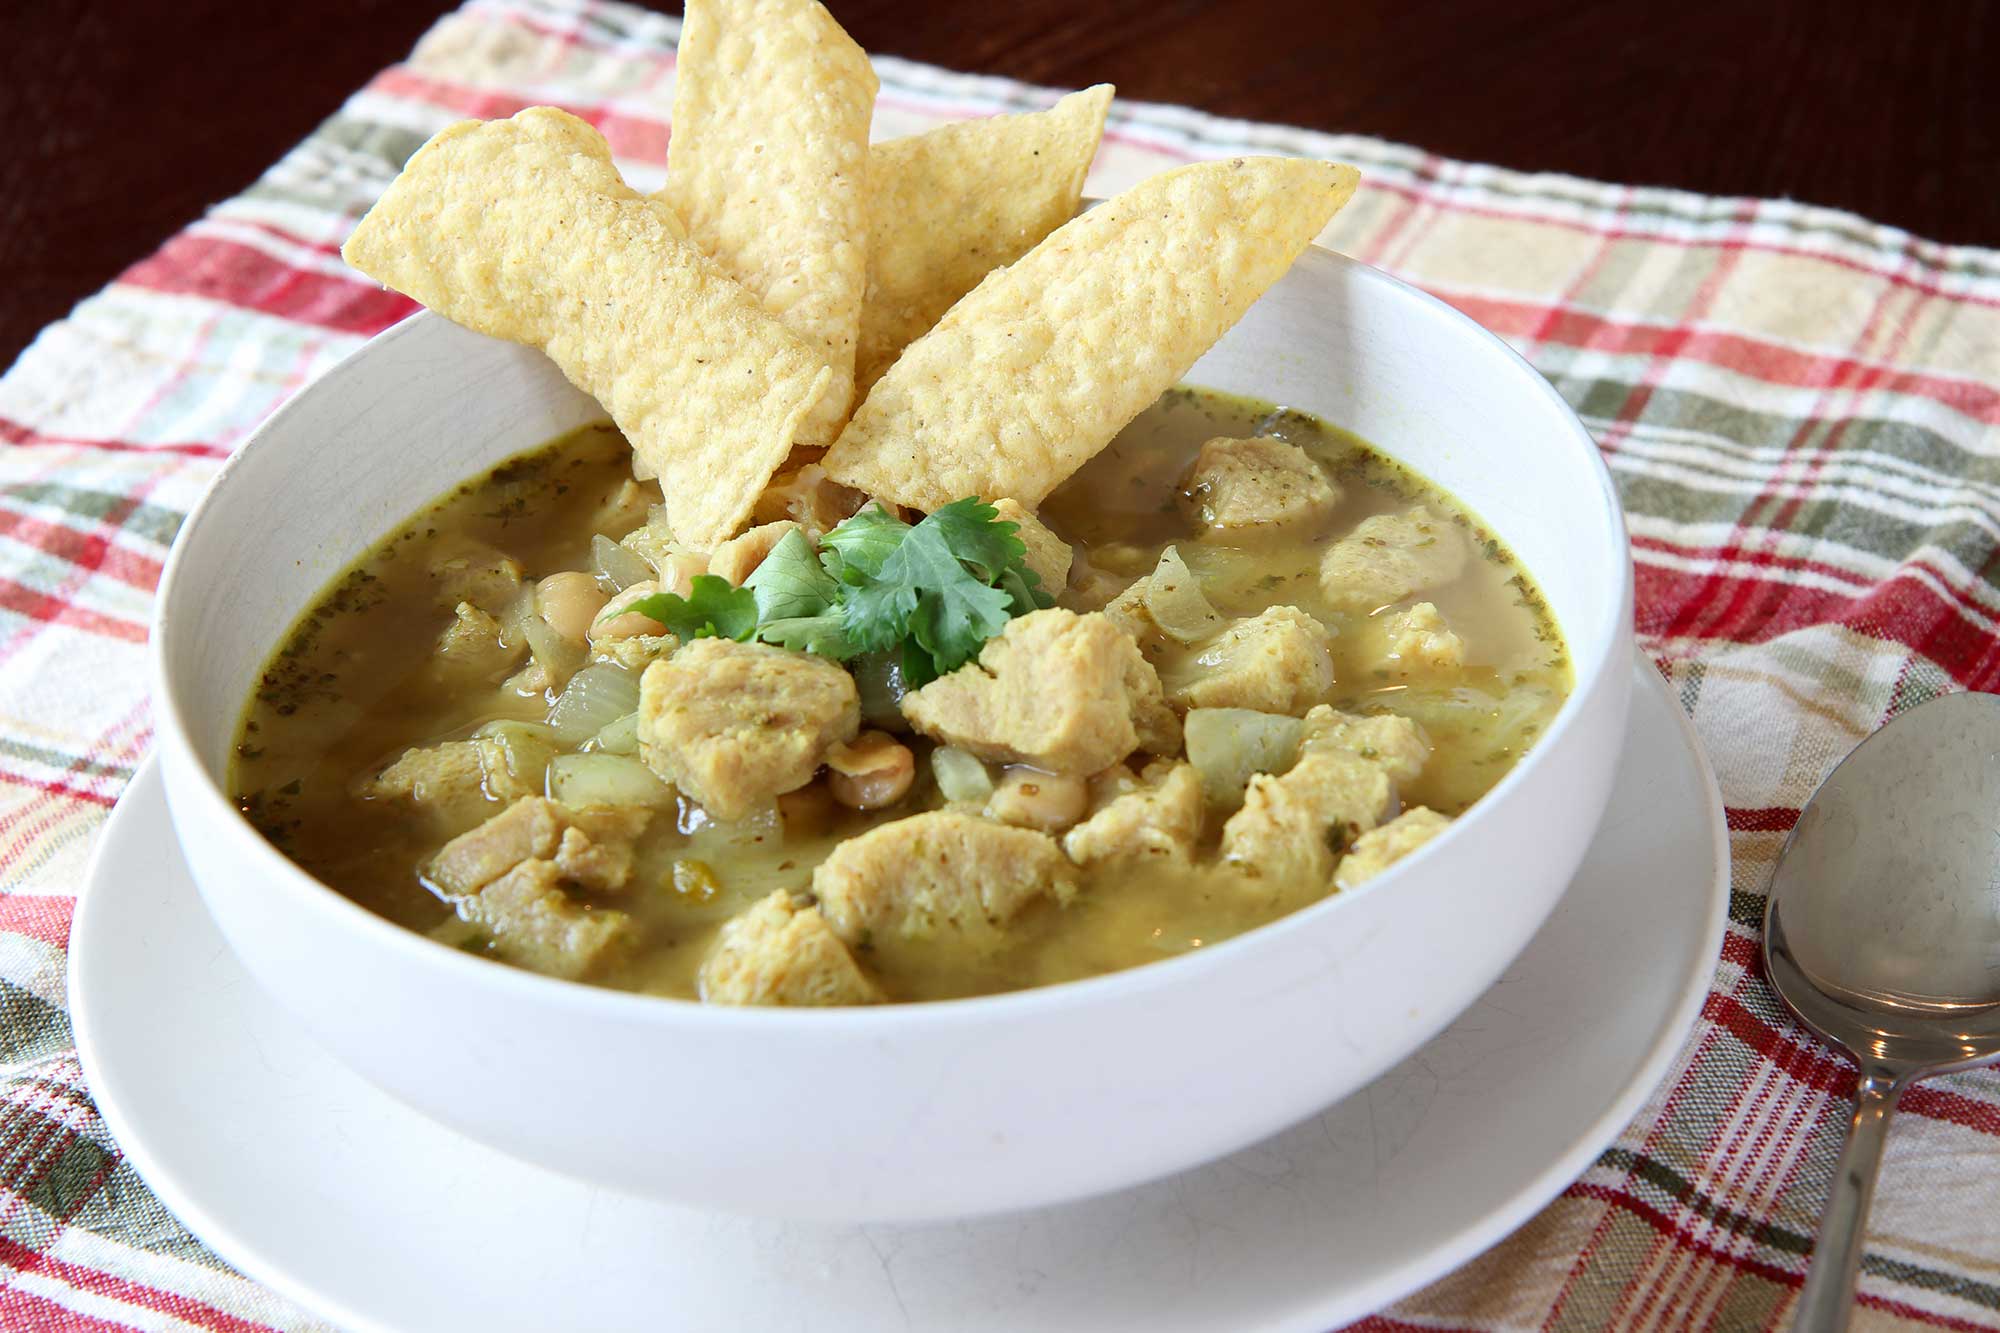 Plant-Based Chicken & White Bean Chili from FakeMeats.com